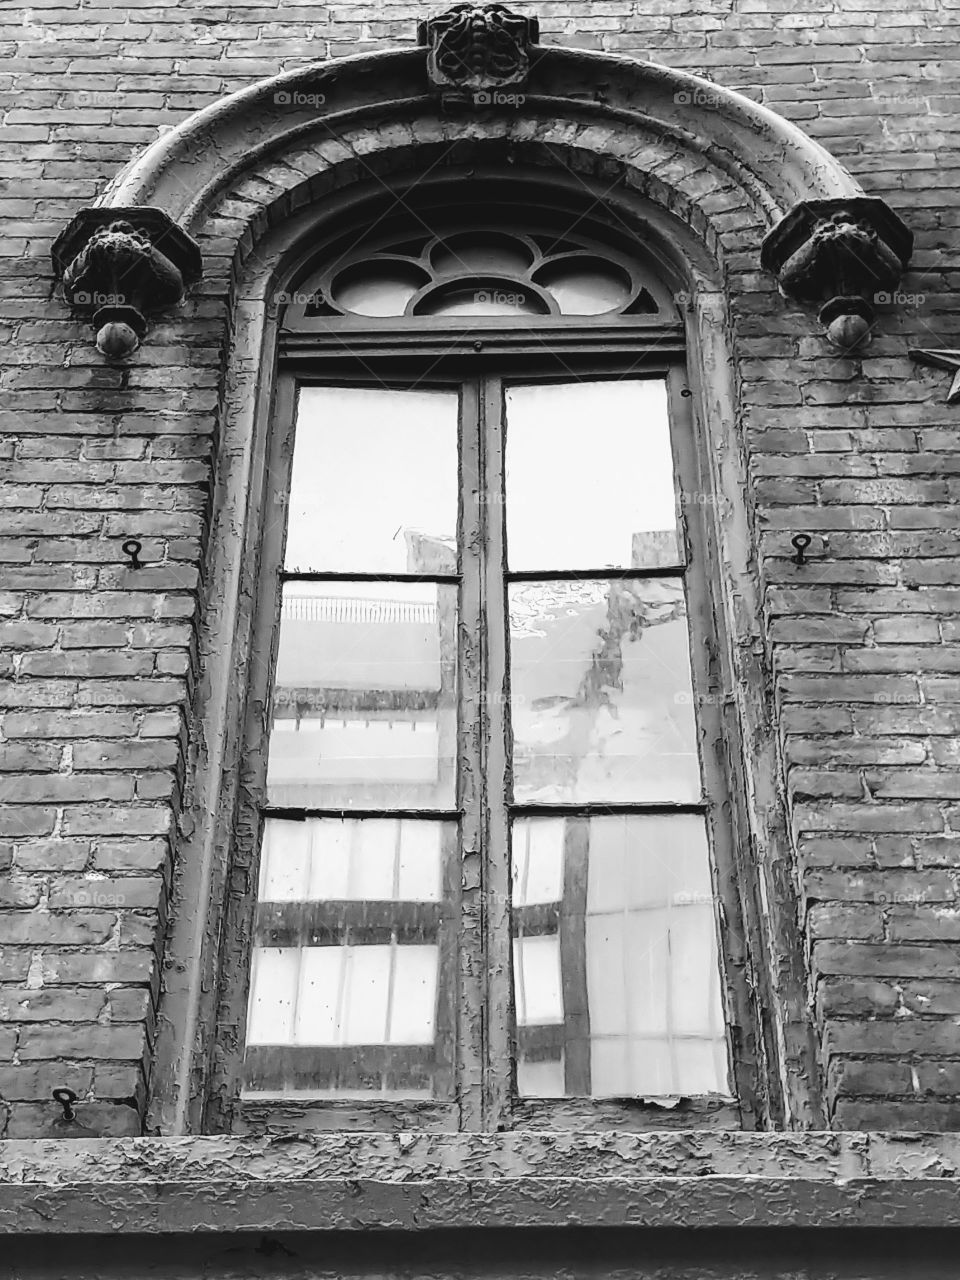 A black and white close up of a vintage window that shows the original wavey glass